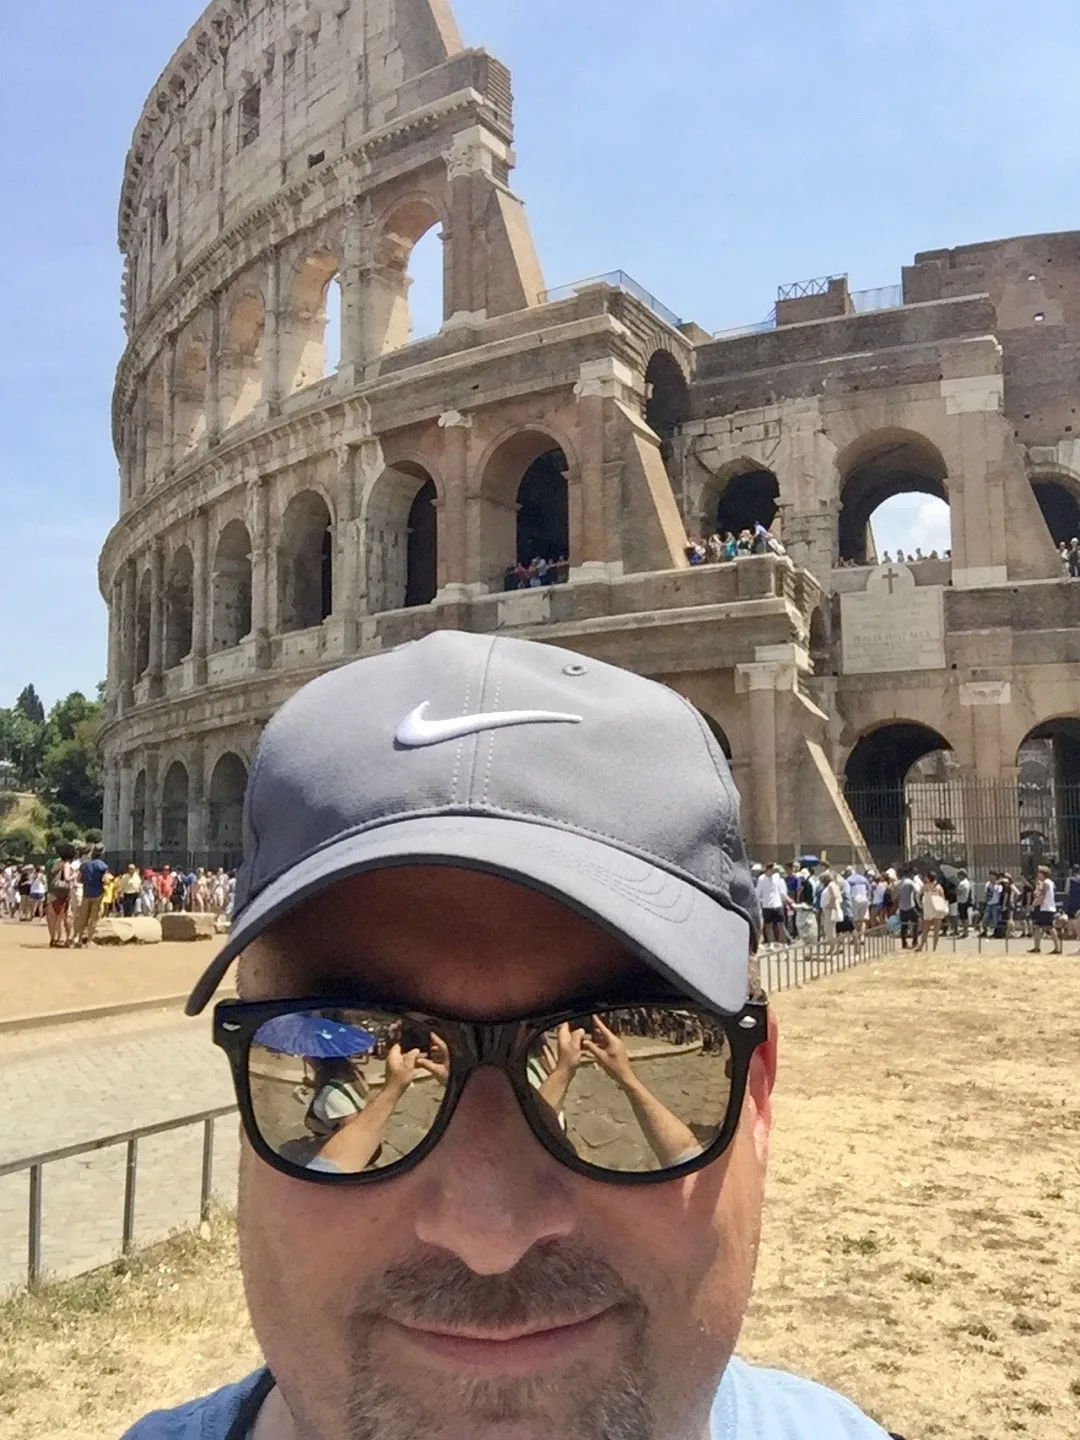 Teacher travel grants for History and Social Studies educators: 6 funded global education programs! In front of the Colosseum in Rome, Italy.